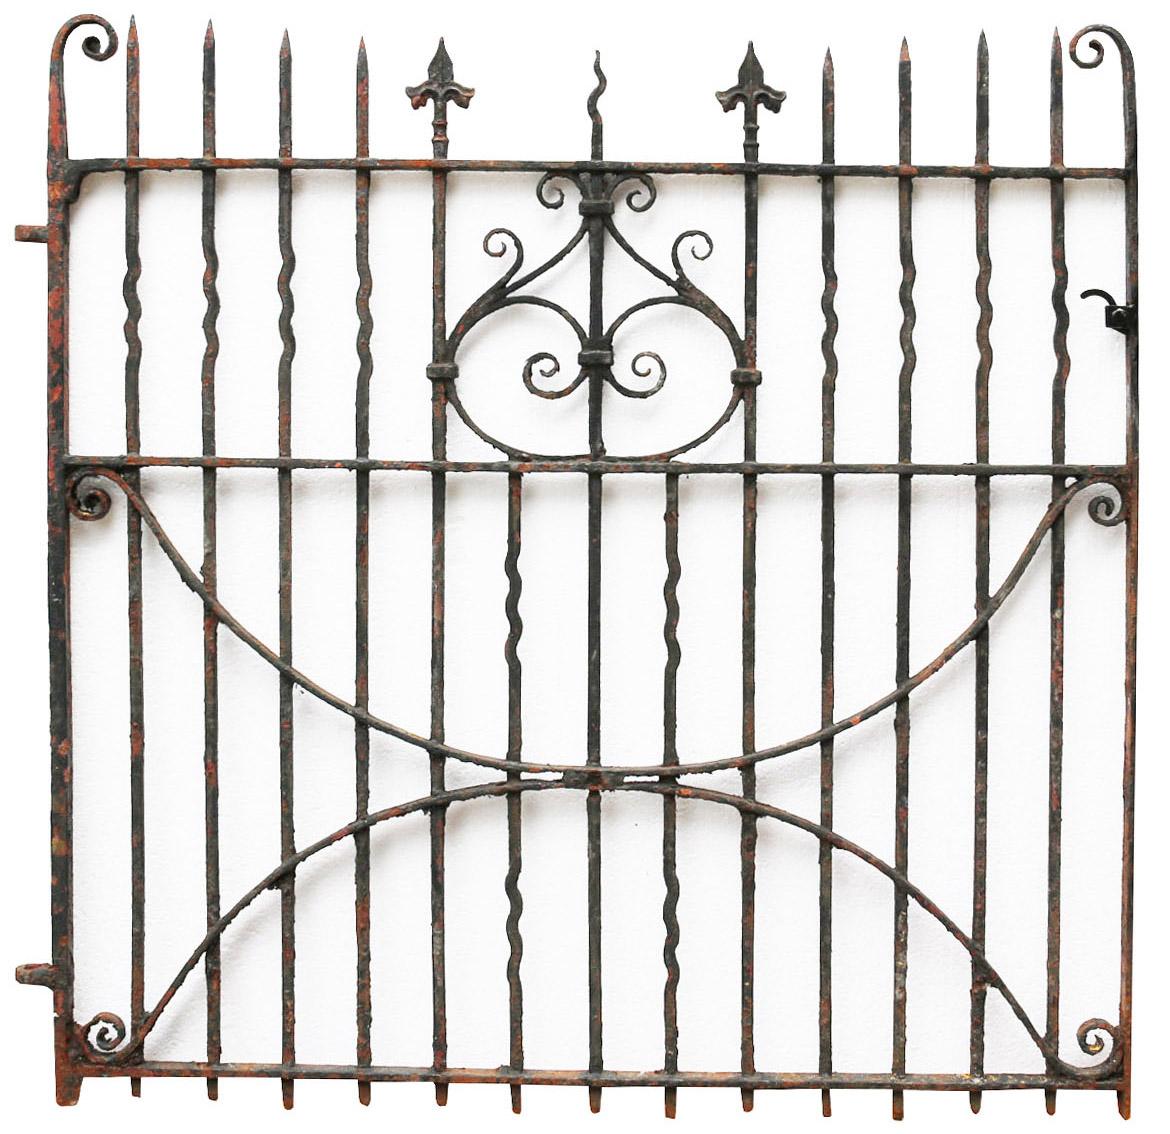 An antique wrought iron garden gate reclaimed from a property near Exeter.

Additional dimensions:

Width of gate 131.5 cm, excluding hinges (for an approximate opening of 129 cm).